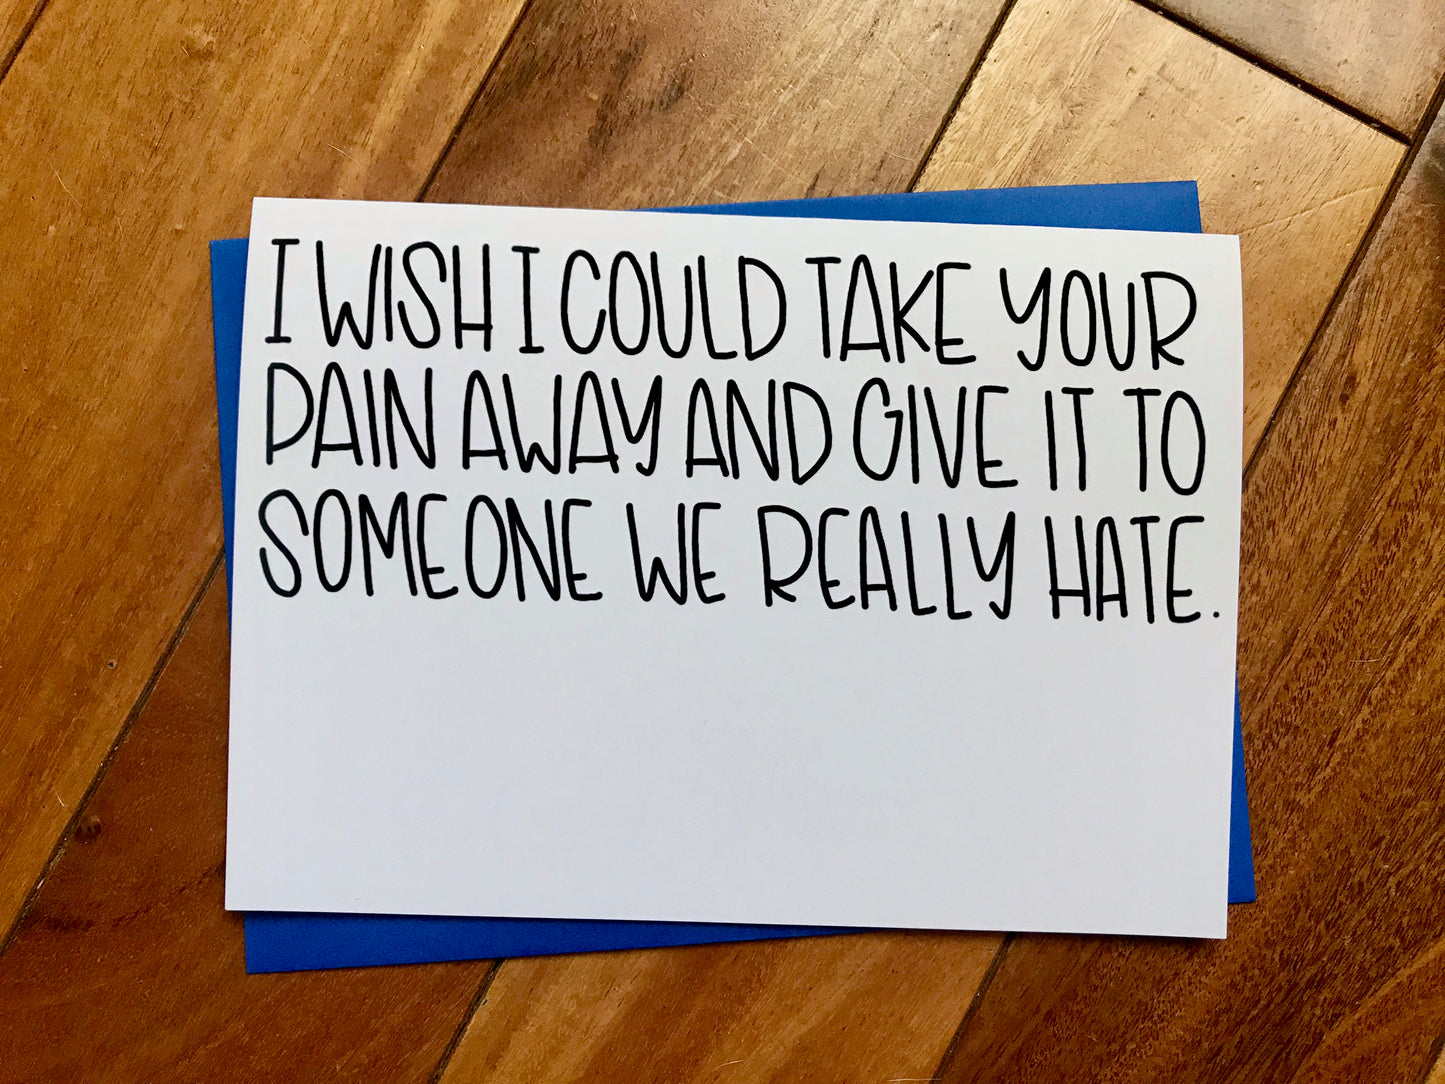 I Wish I could Take Away Your Pain and Give it to Someone We Really Hate Funny Card by stonedonut shop